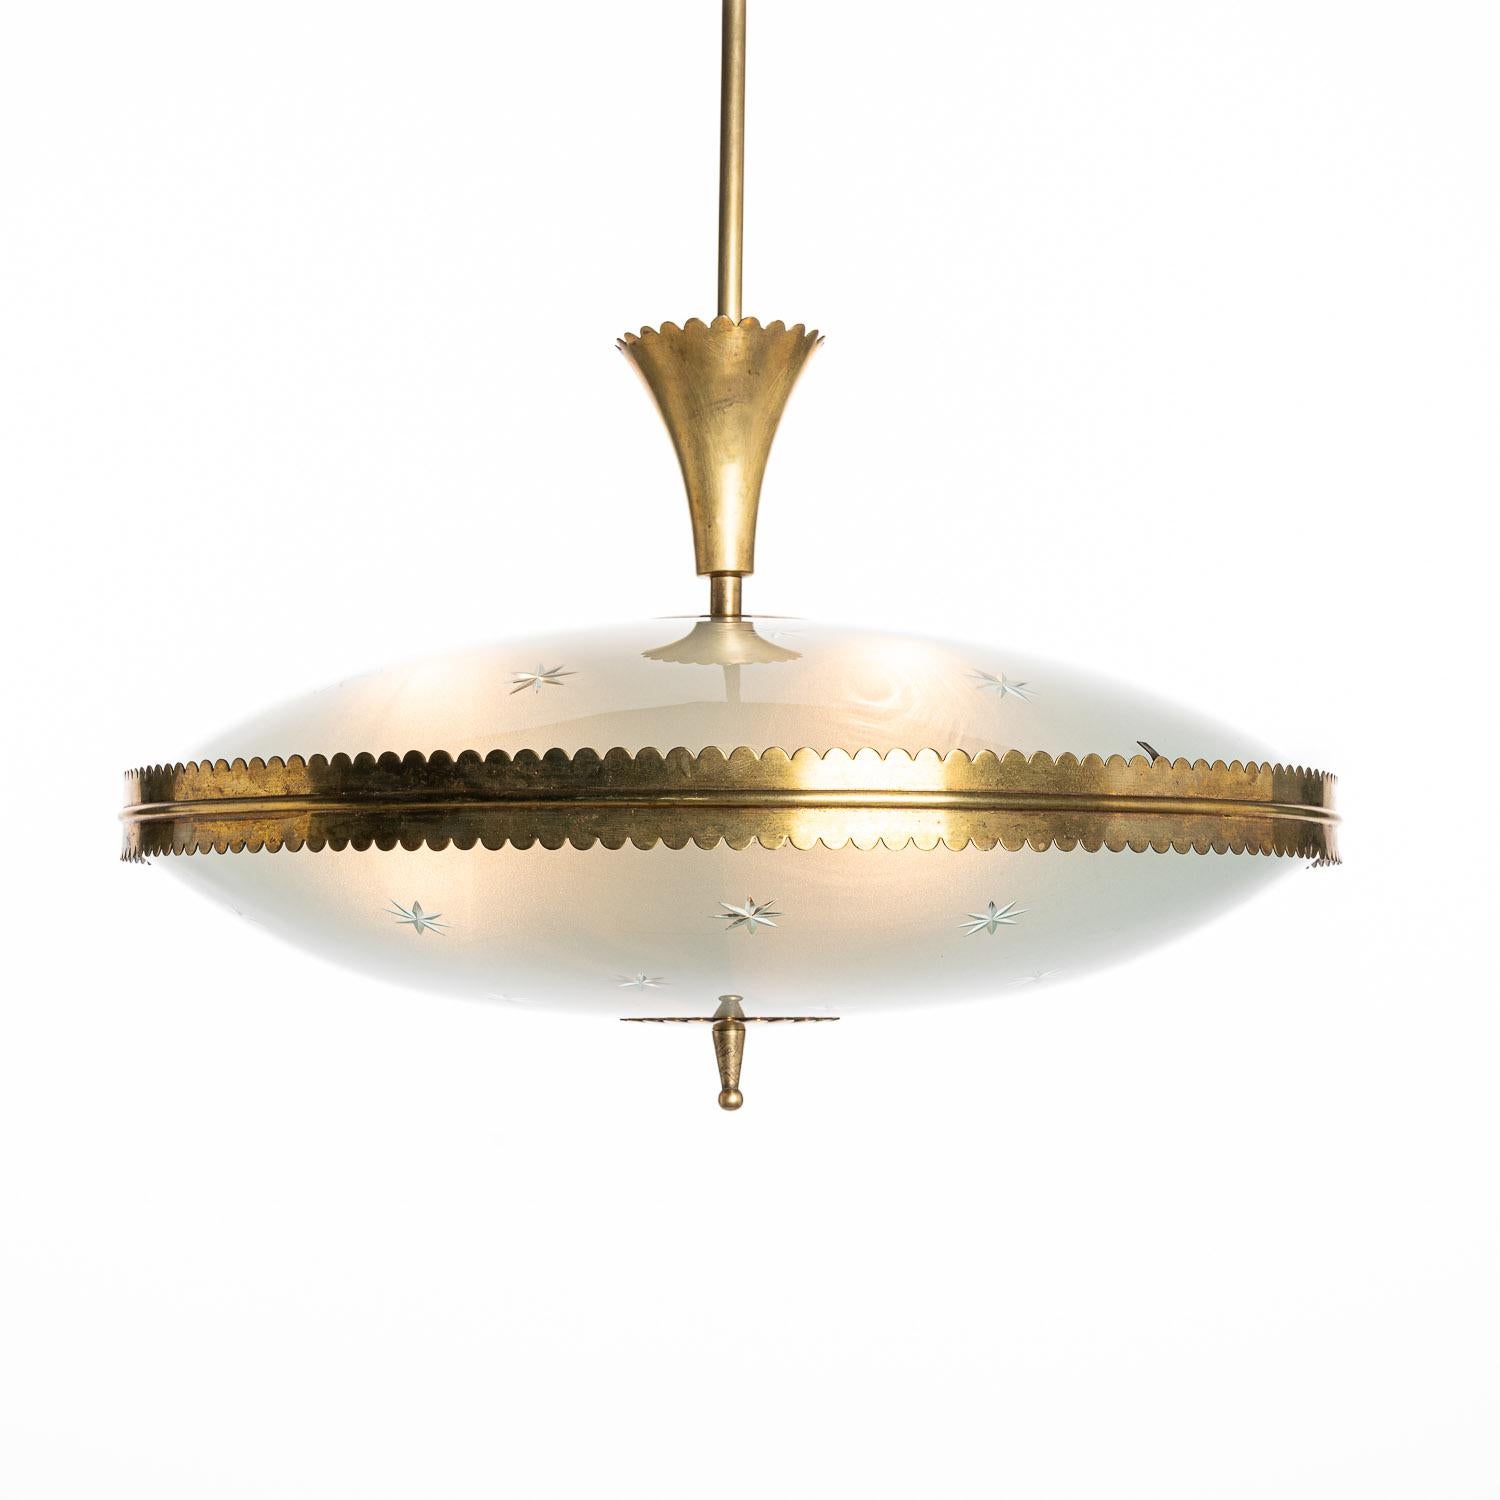 This stunning and elegant light consisting of a brass frame and 2 unique glass reflector/saucers. 
The lower and upper satin and curved glass reflectors with engraved star decorations. A beautiful brass ring to connect the panels. In the center 3